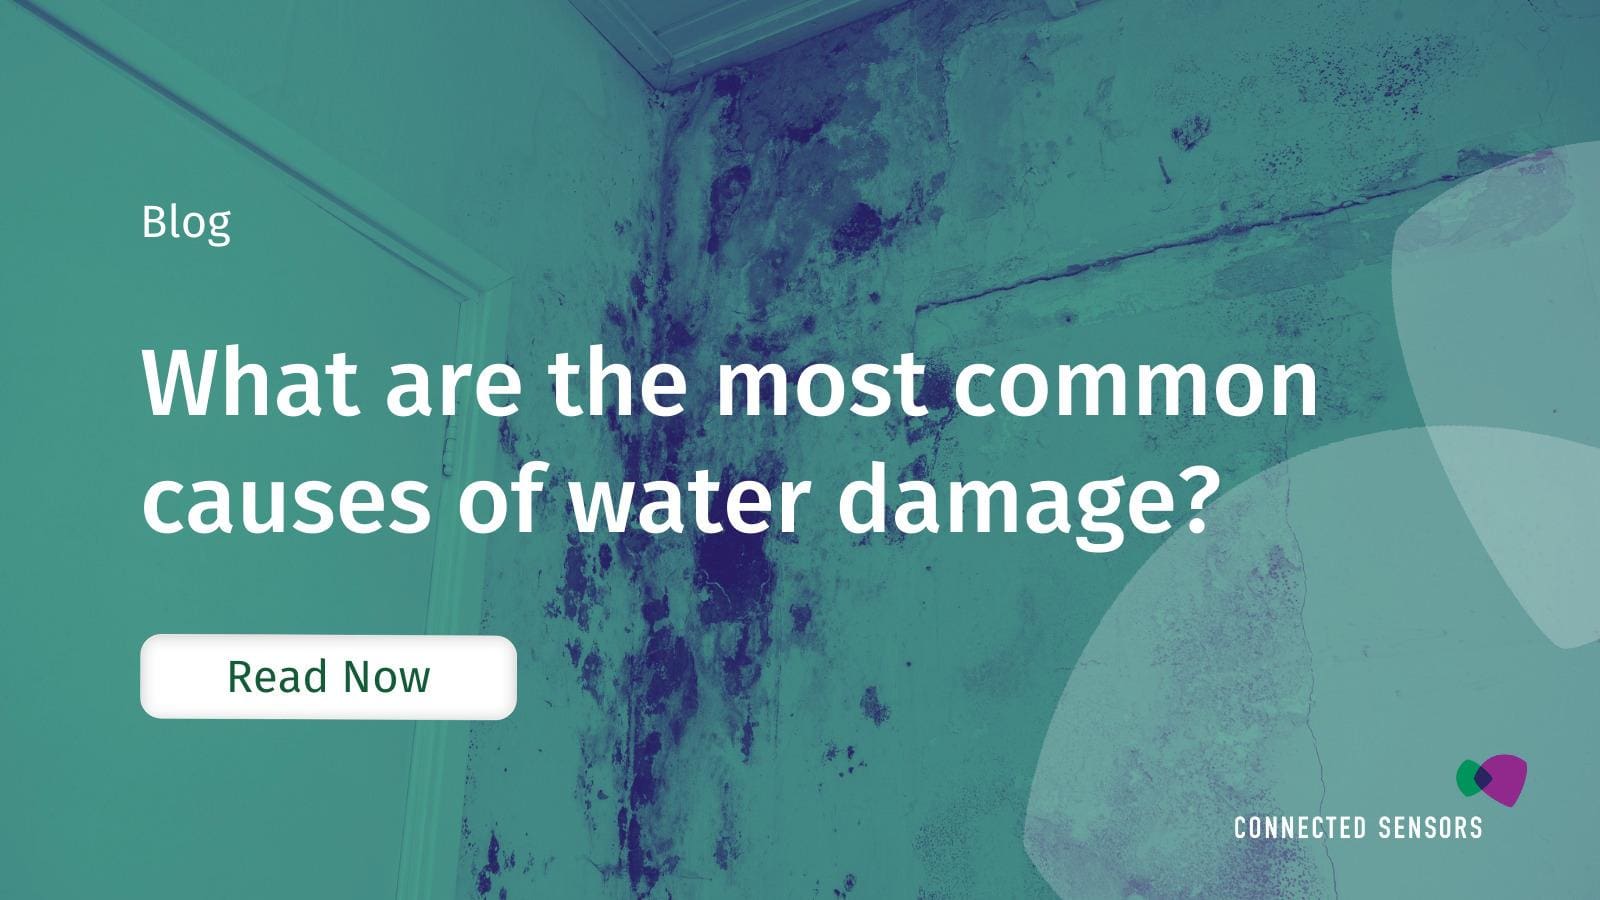 Causes of Water Damage